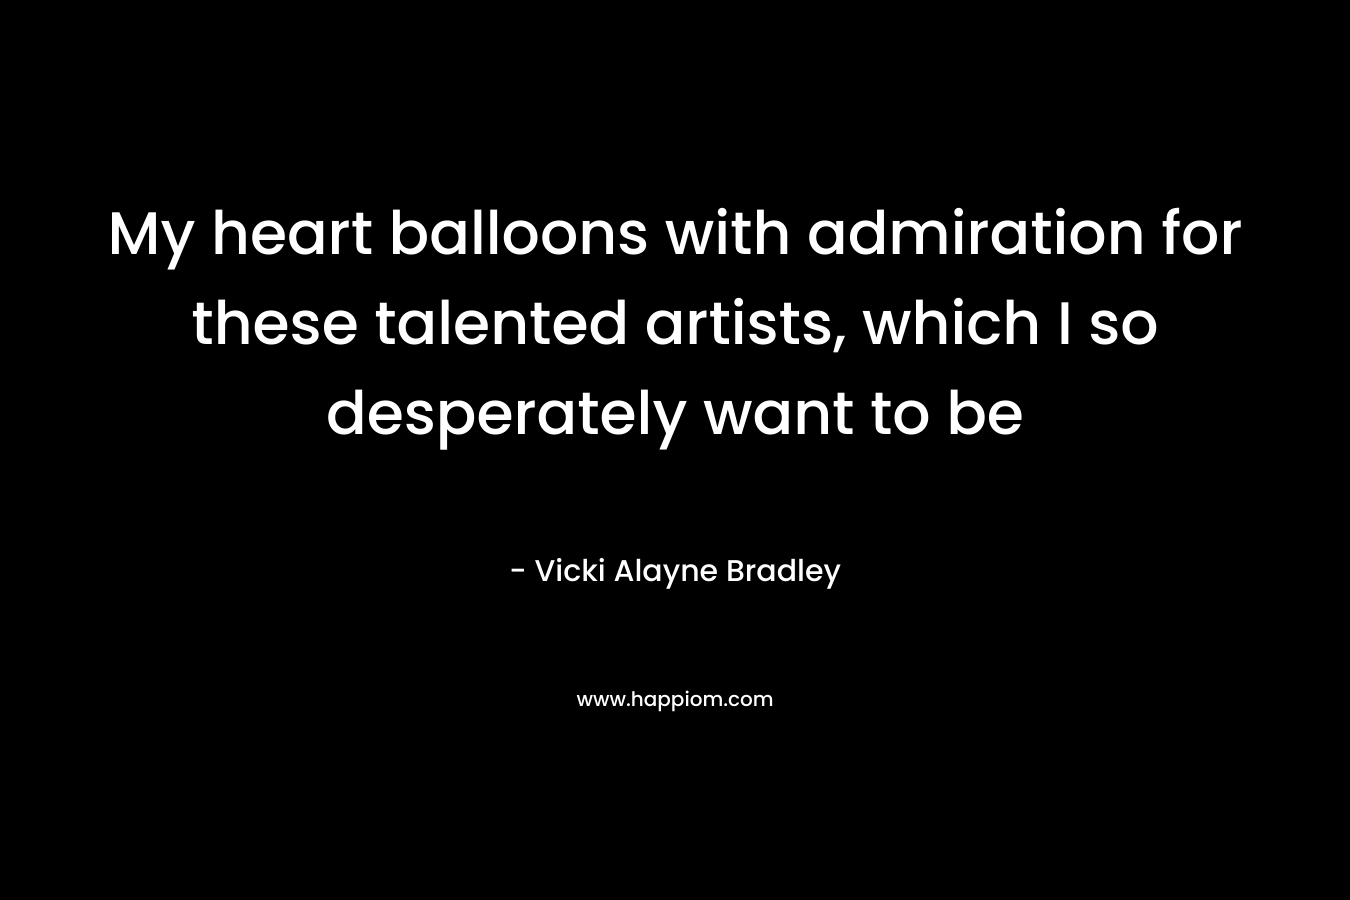 My heart balloons with admiration for these talented artists, which I so desperately want to be – Vicki Alayne Bradley